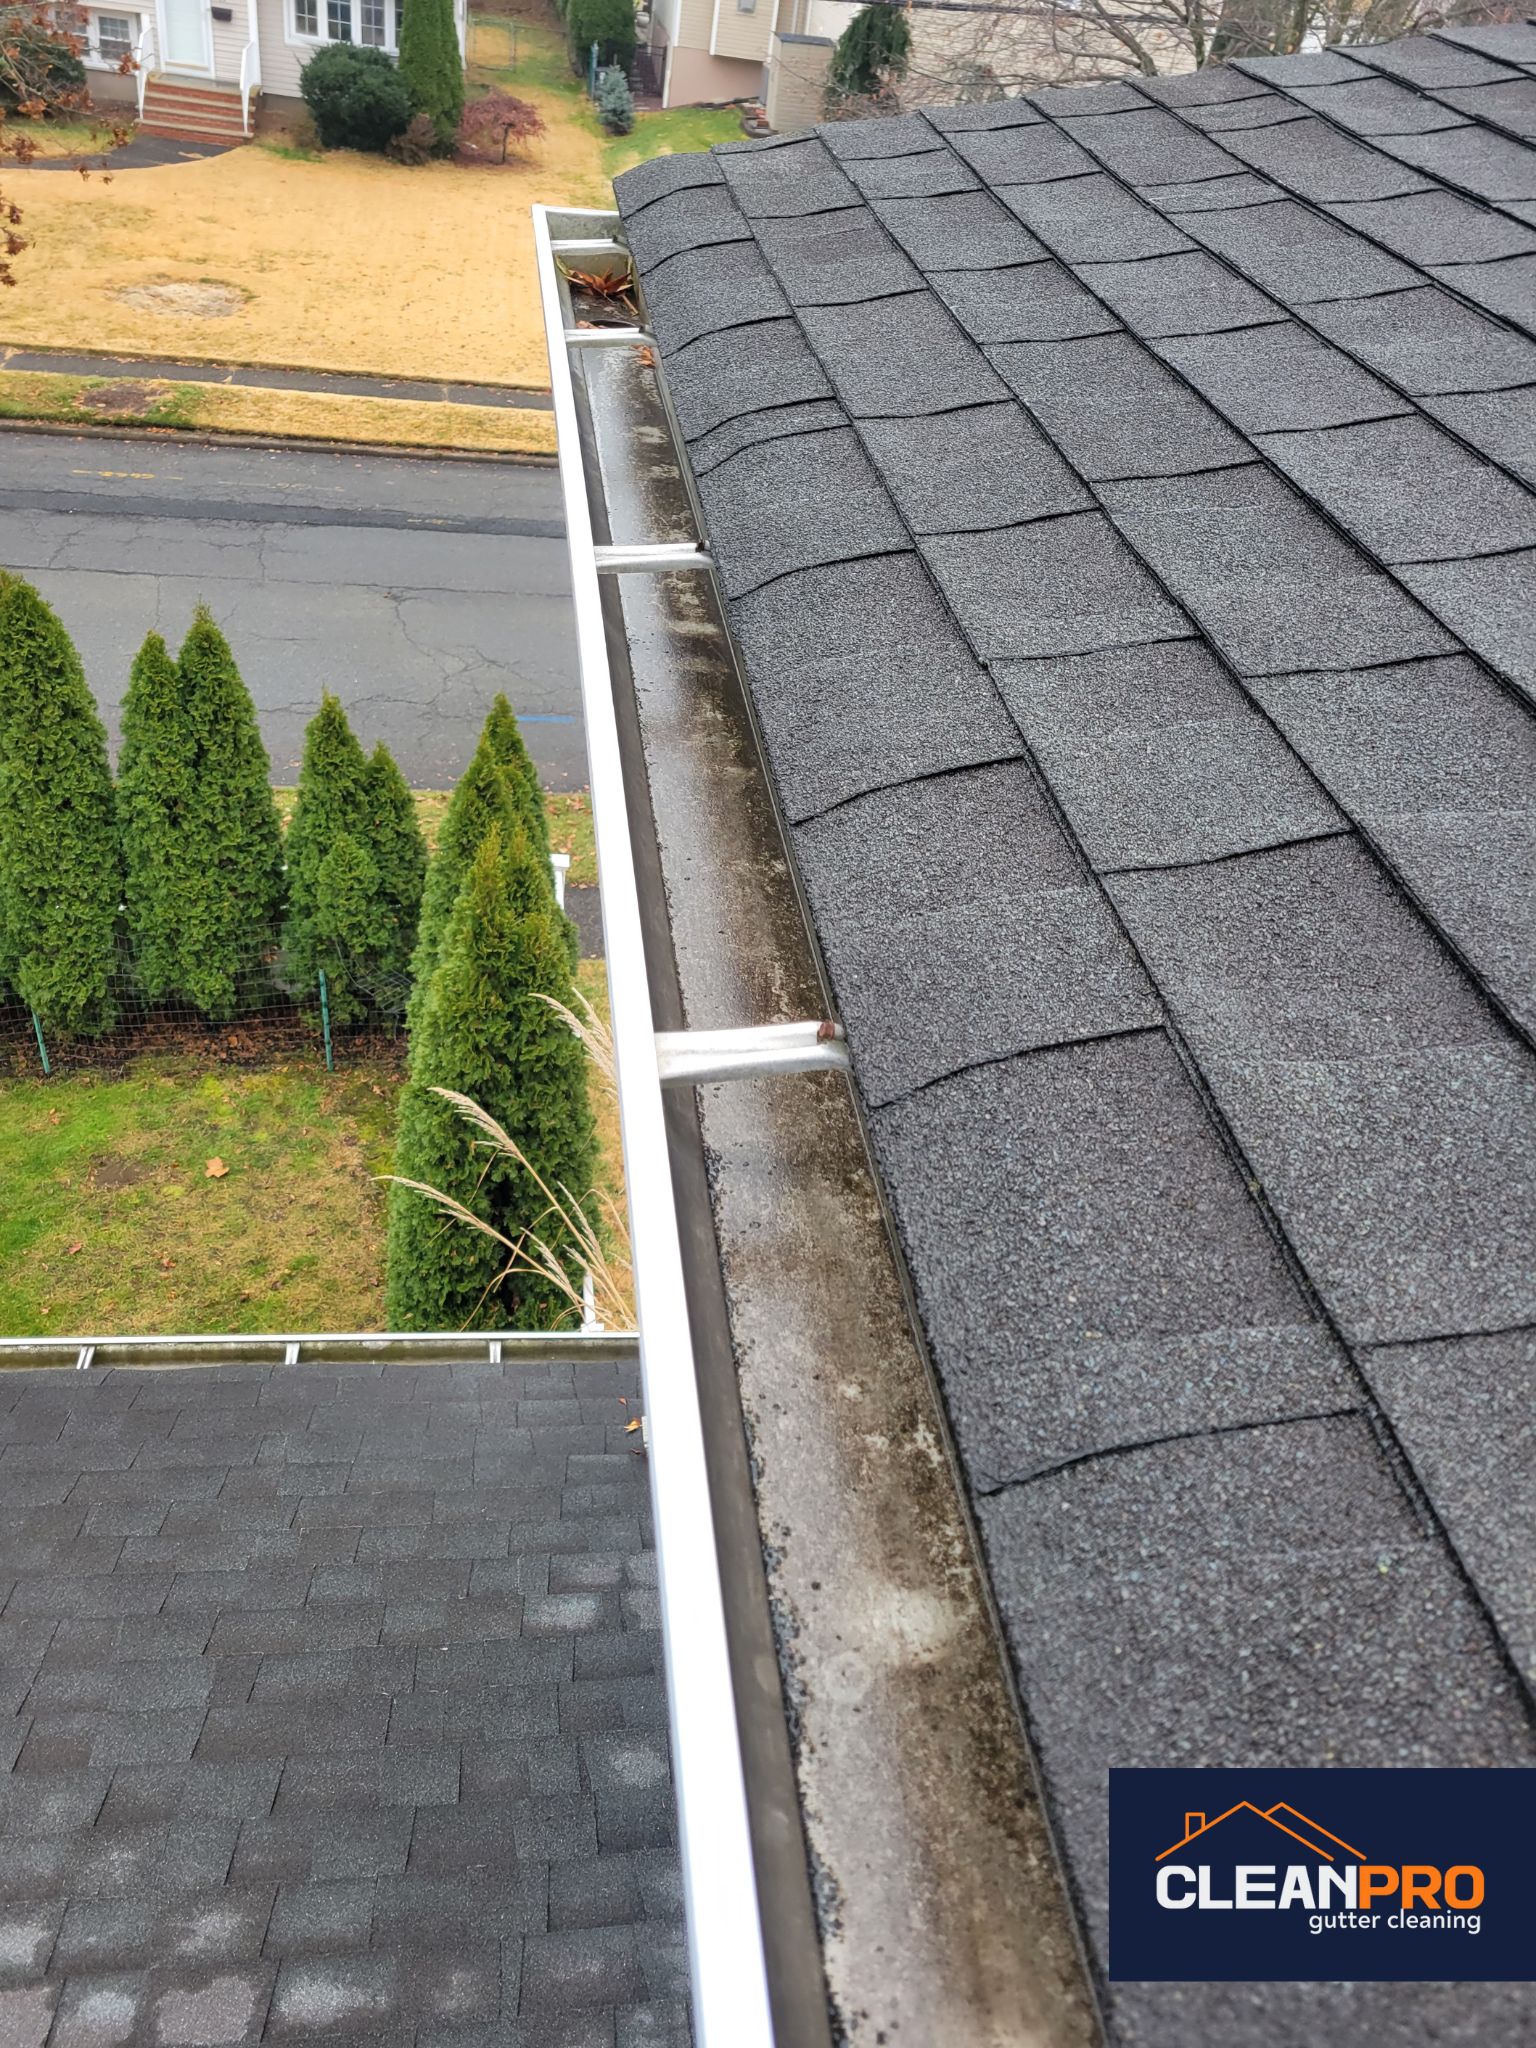 Local Gutter Cleaning in Lilburn GA